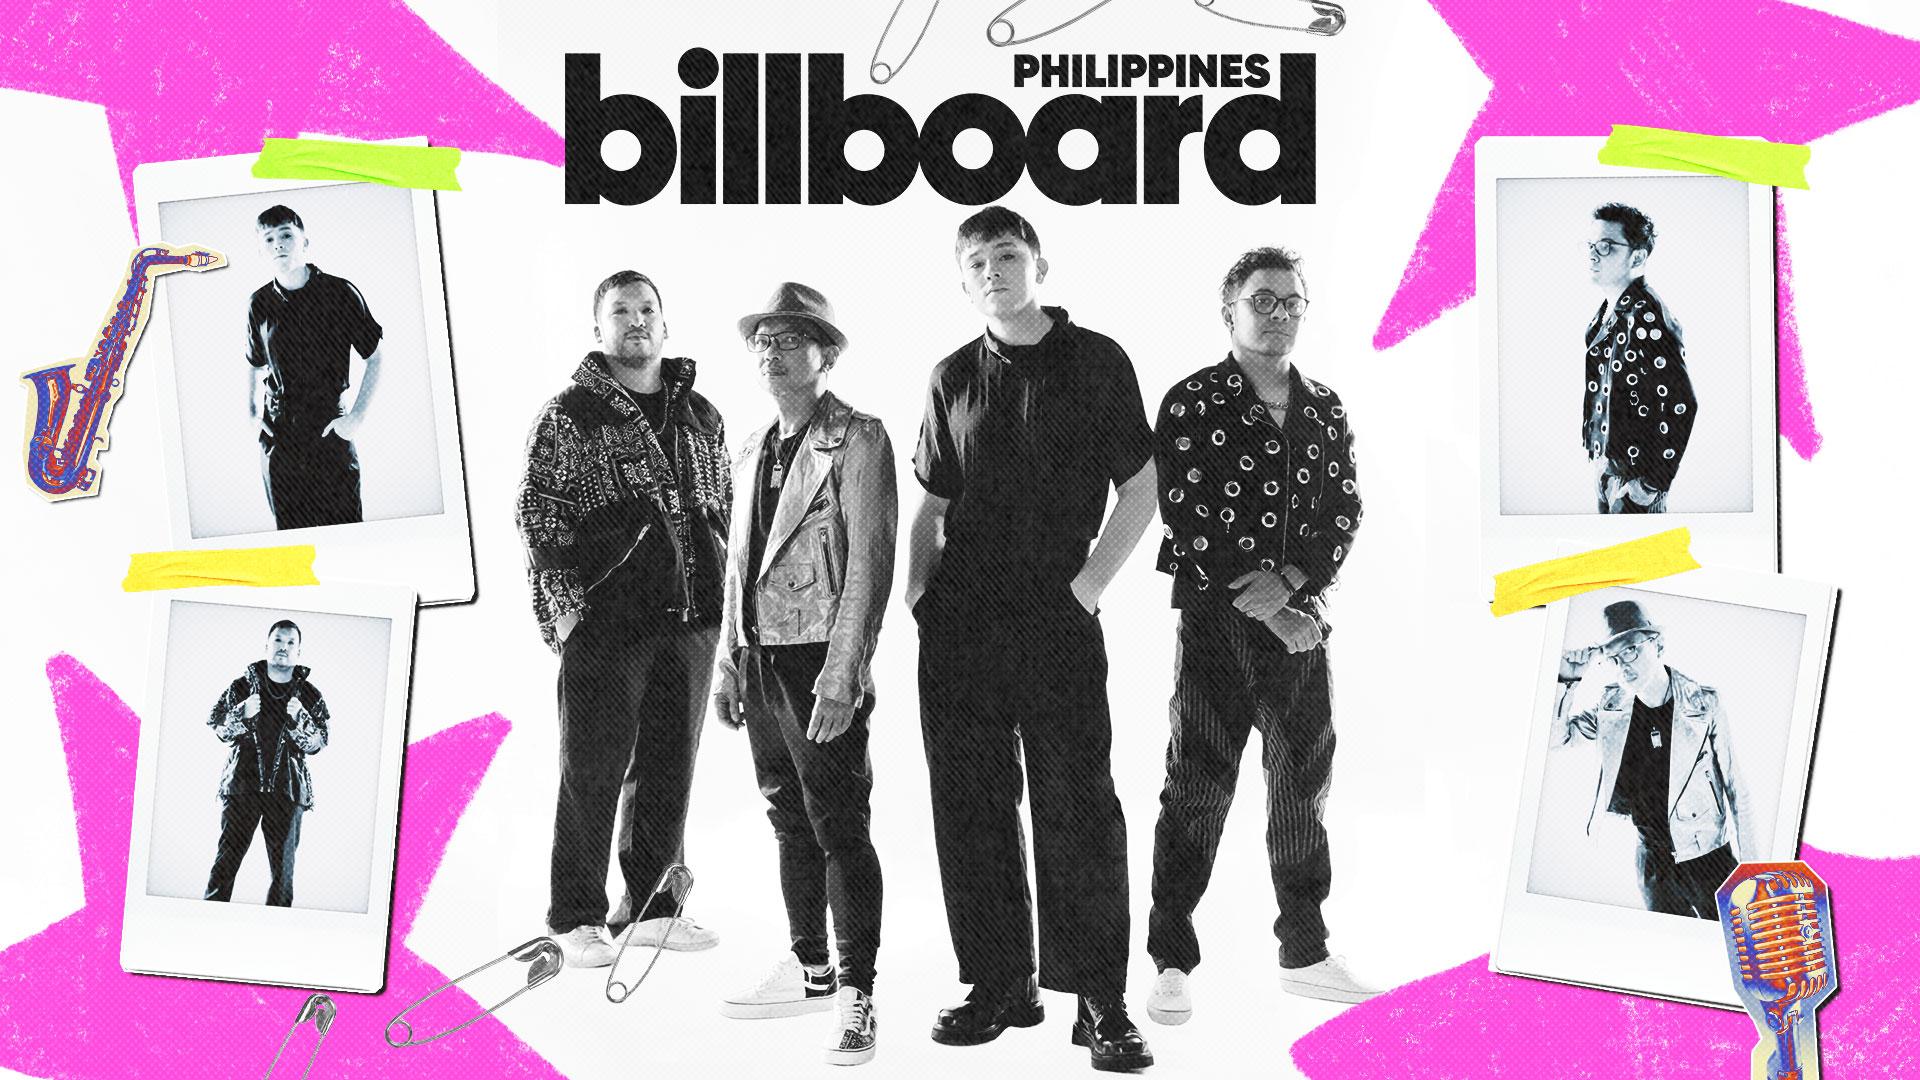 Meet The Team Who Will Lead Billboard Philippines